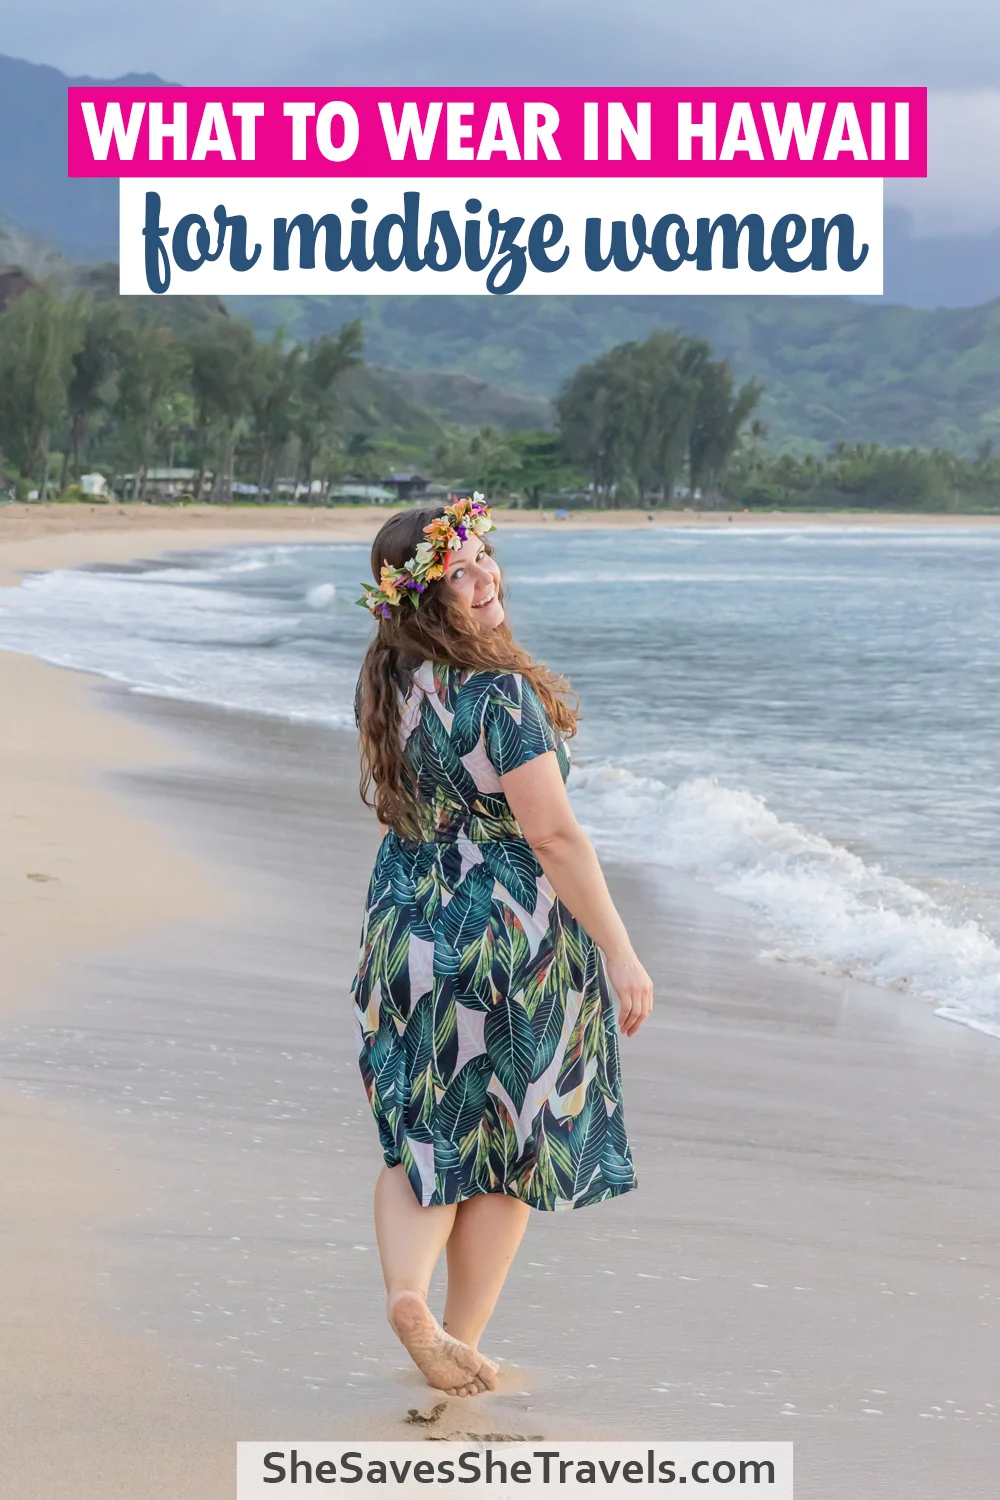 image with woman on beach with text that reads what to wear in Hawaii for midsize women